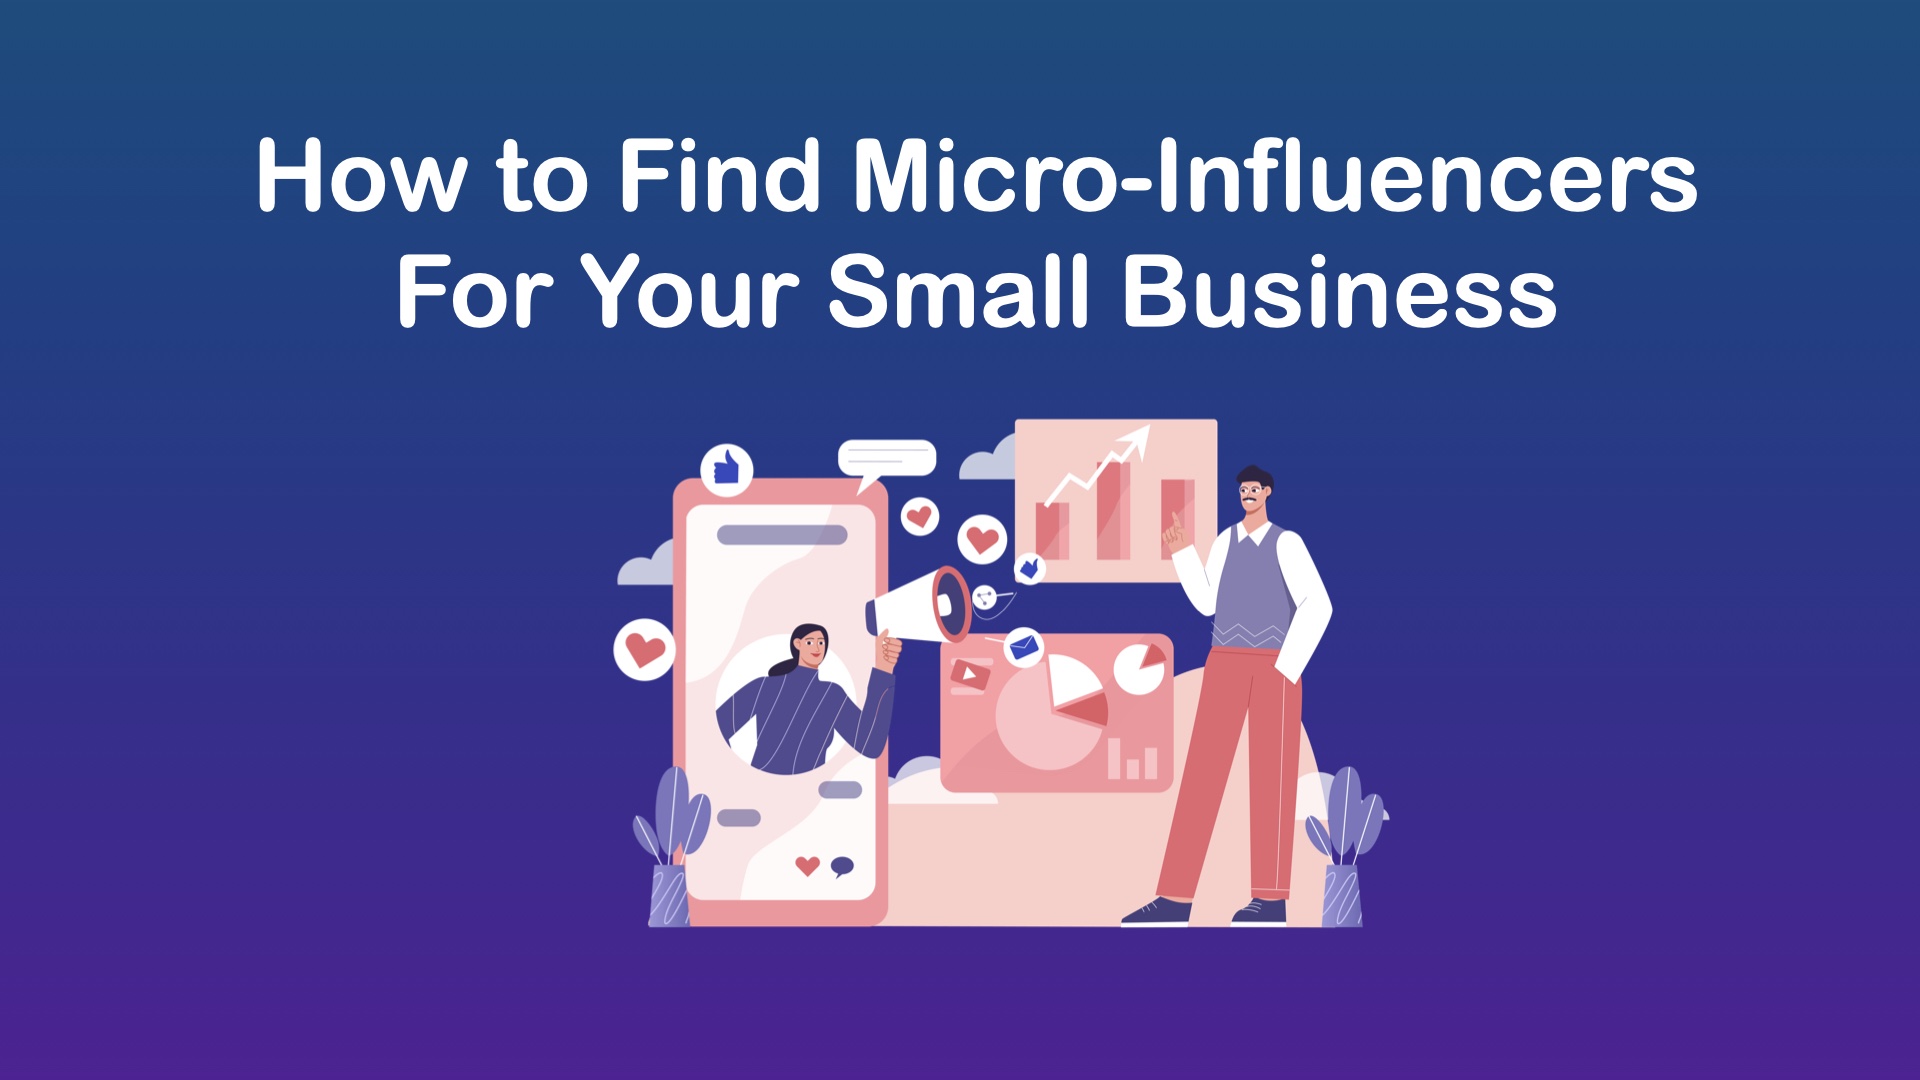 How To Find Micro-Influencers For Your Small Business